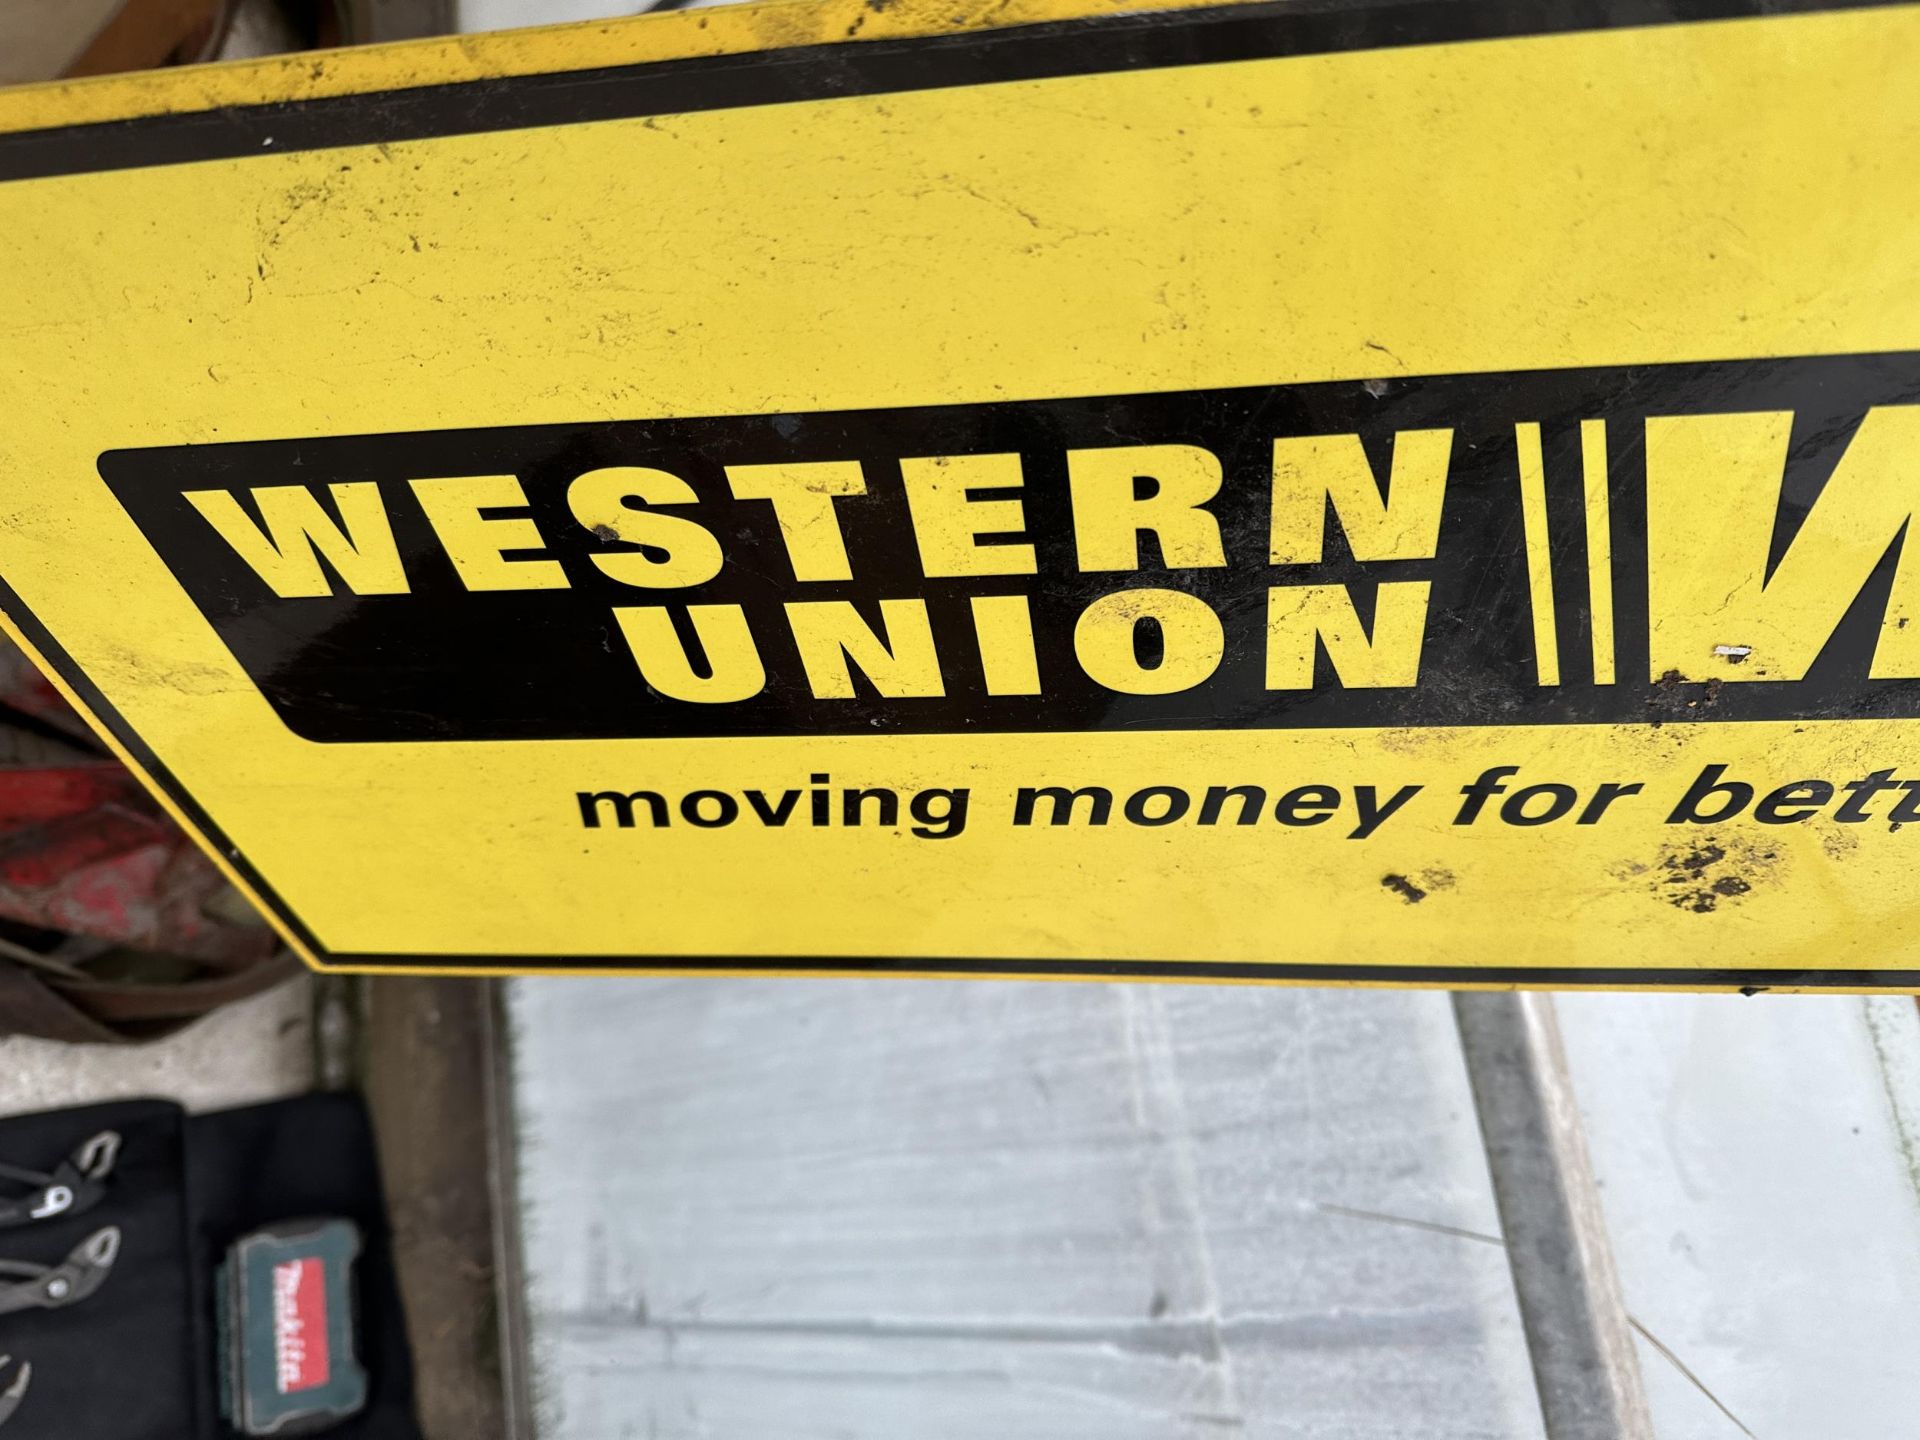 A METAL 'WESTERN UNION' WALL MOUNTED SIGN - Image 3 of 3